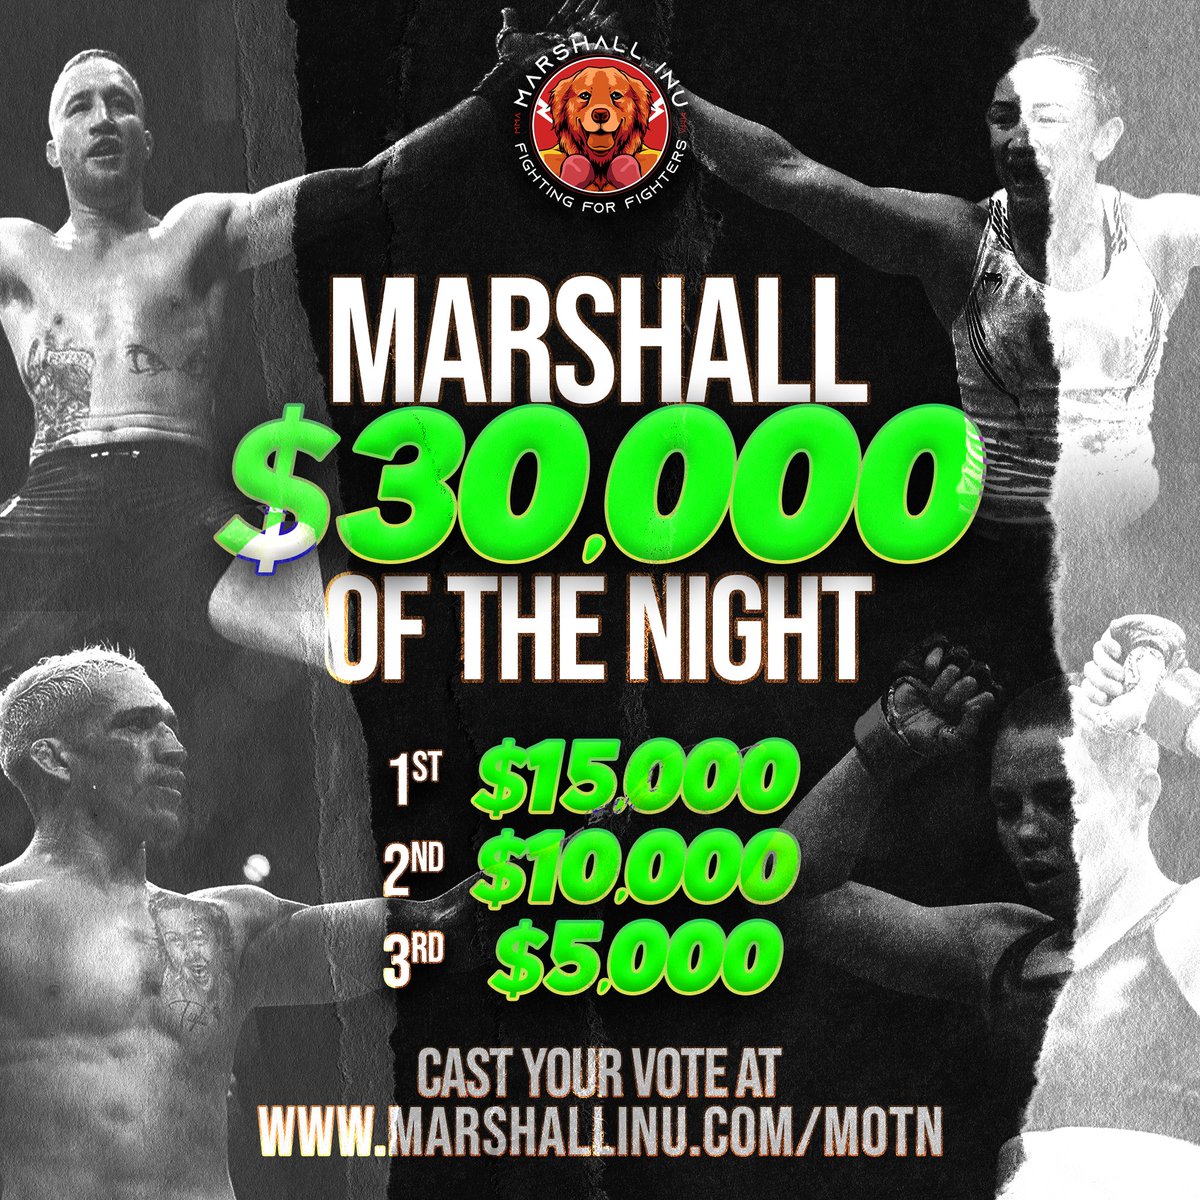 Marshall of the Night is Live! marshallinu.com/motn Marshalls across the globe are here to fight for our favorite fighters worldwide. We love paying fighters that bit extra for putting their health on the line. #ThankYouMarshall #FightingforFighters